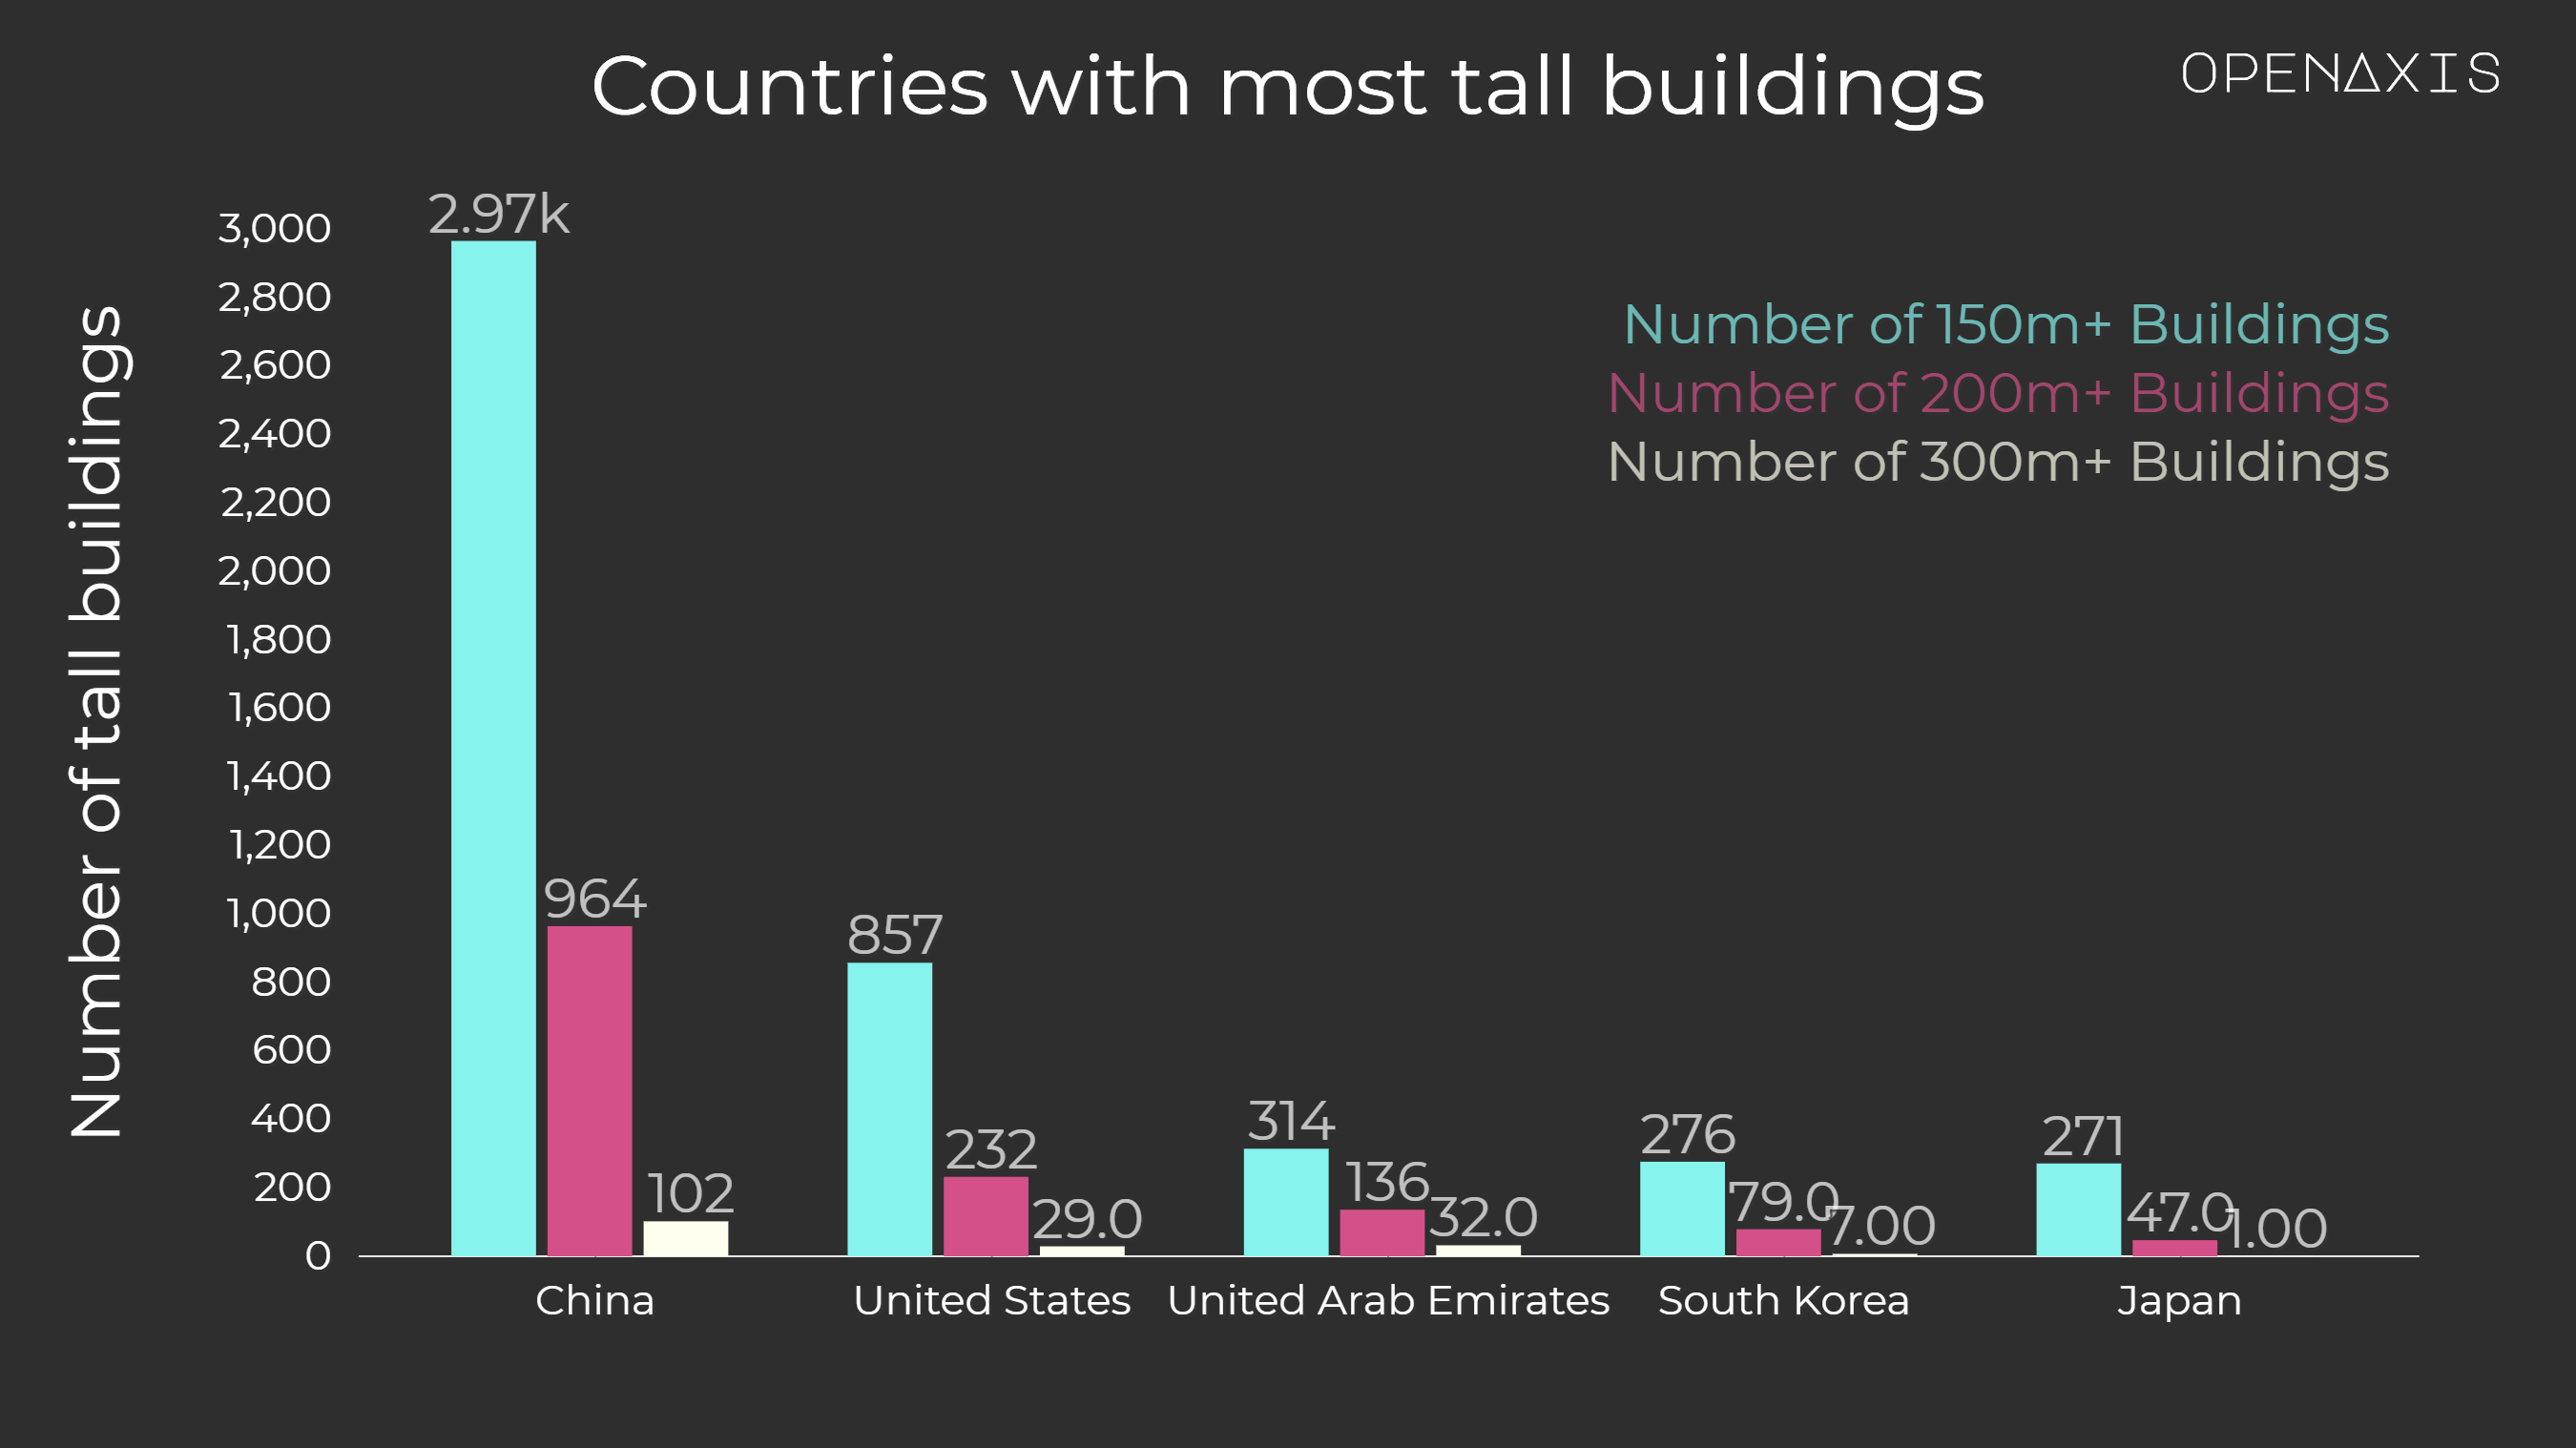 "Countries with most tall buildings"